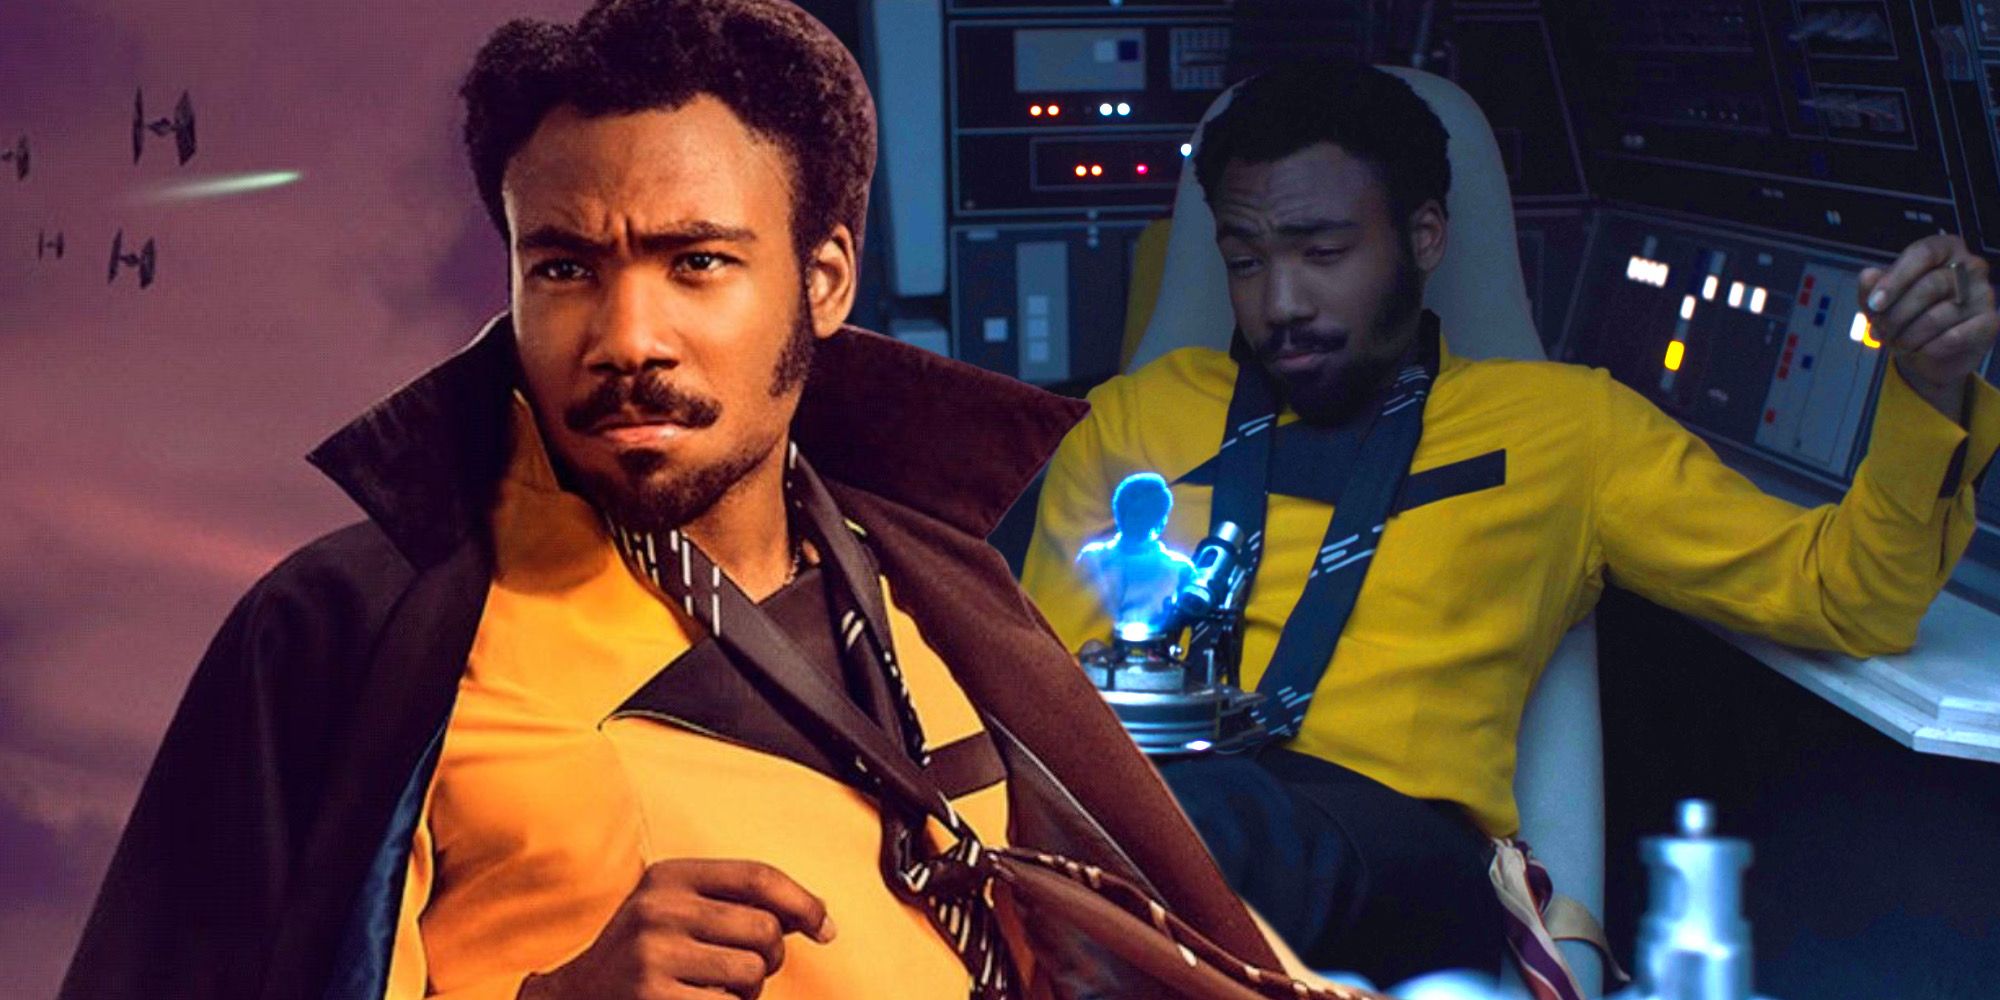 Donald Glover As Lando For Solo With Poster And Calrissian Chronicles